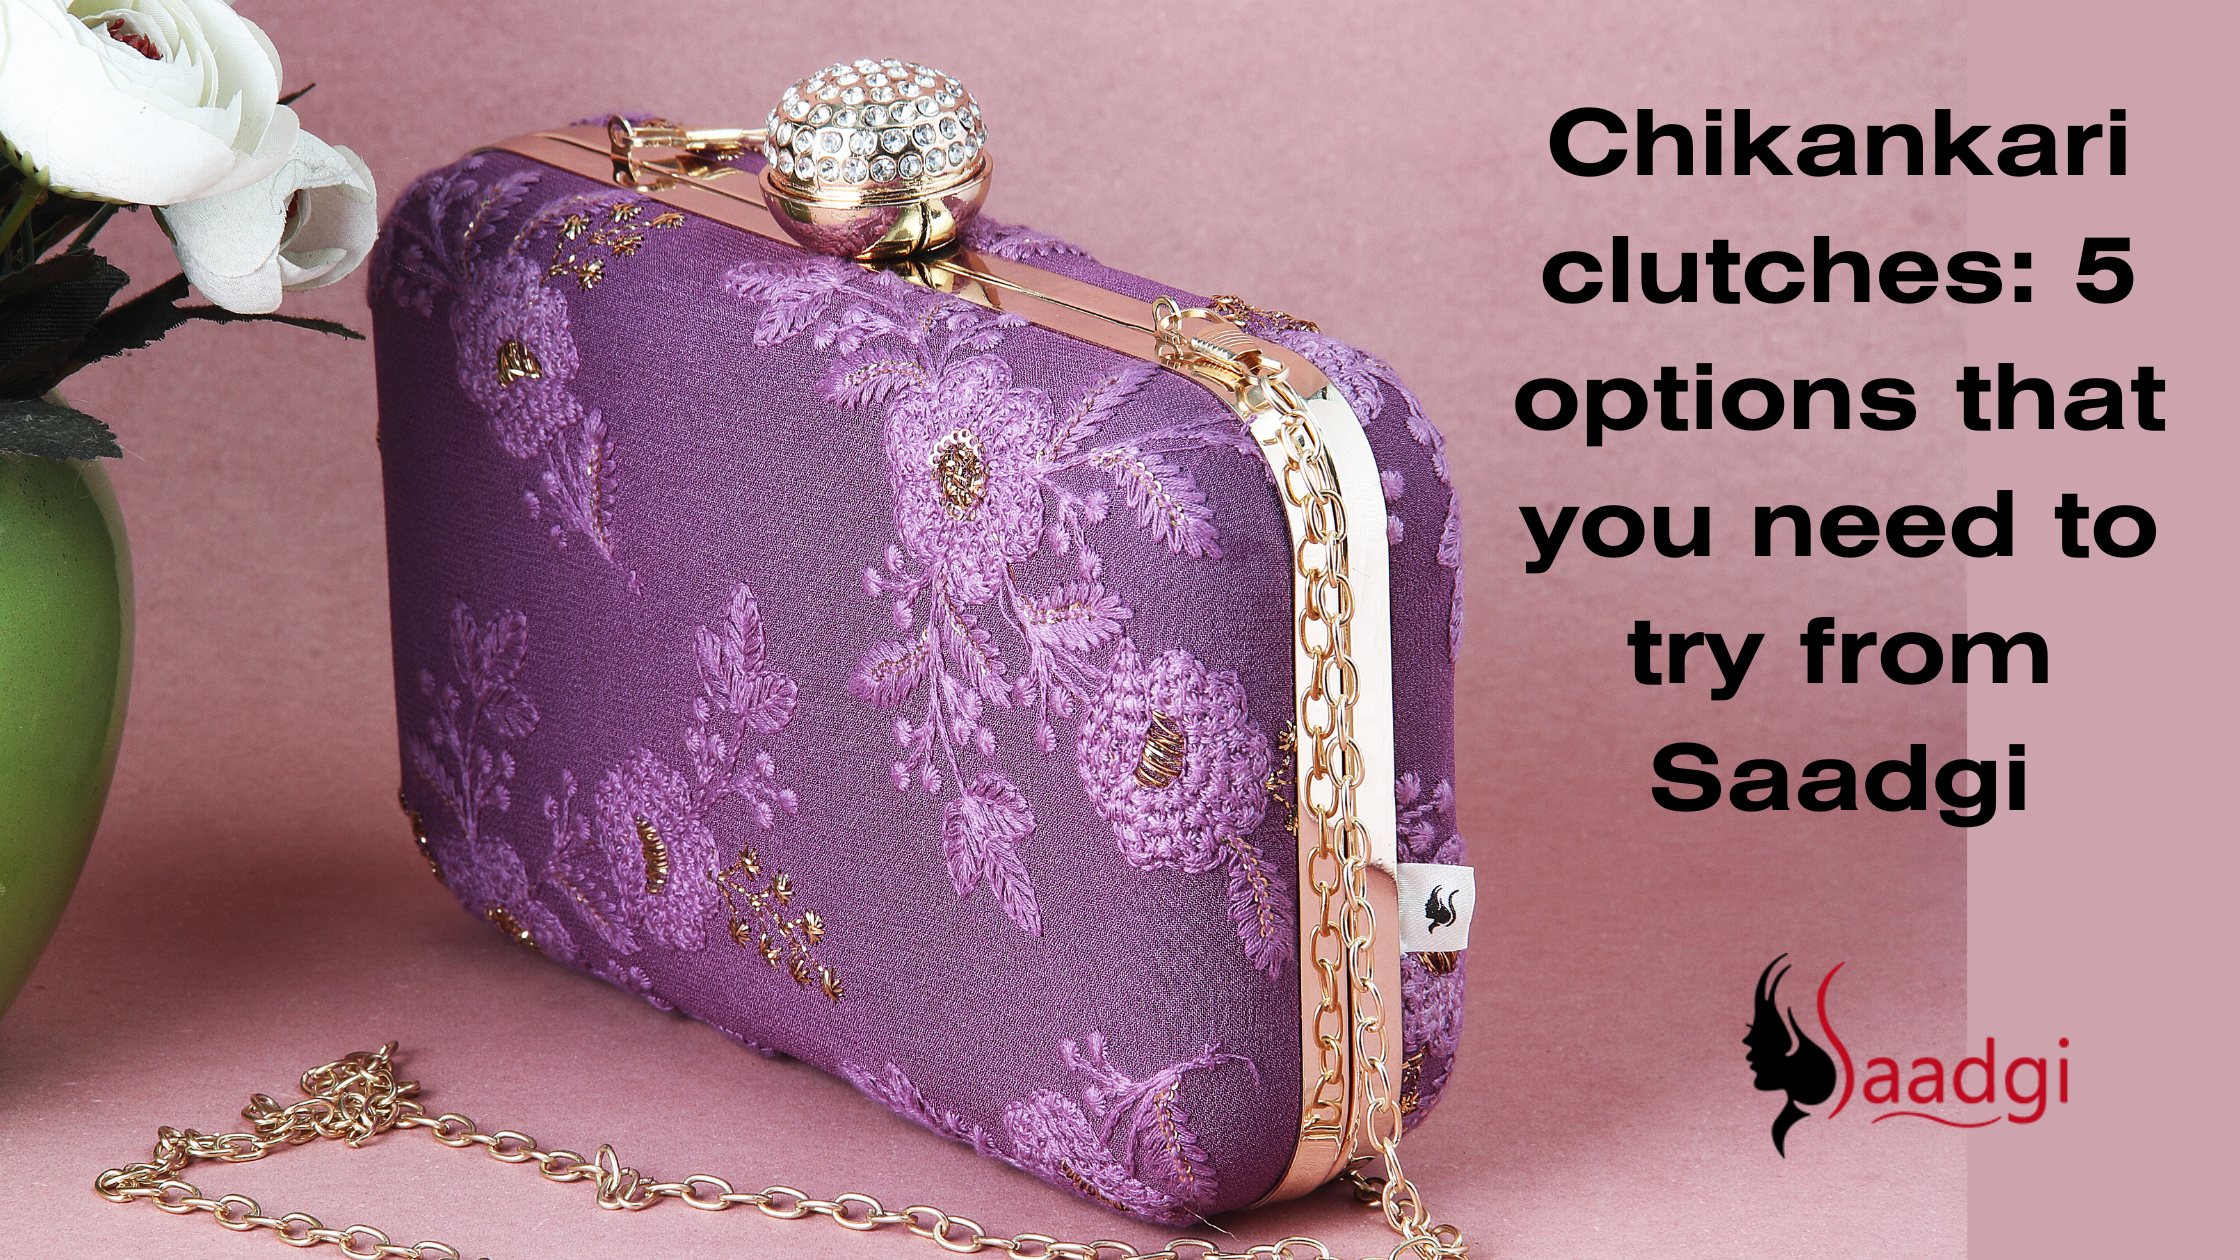 Chikankari clutches: 5 options that you need to try from Saadgi